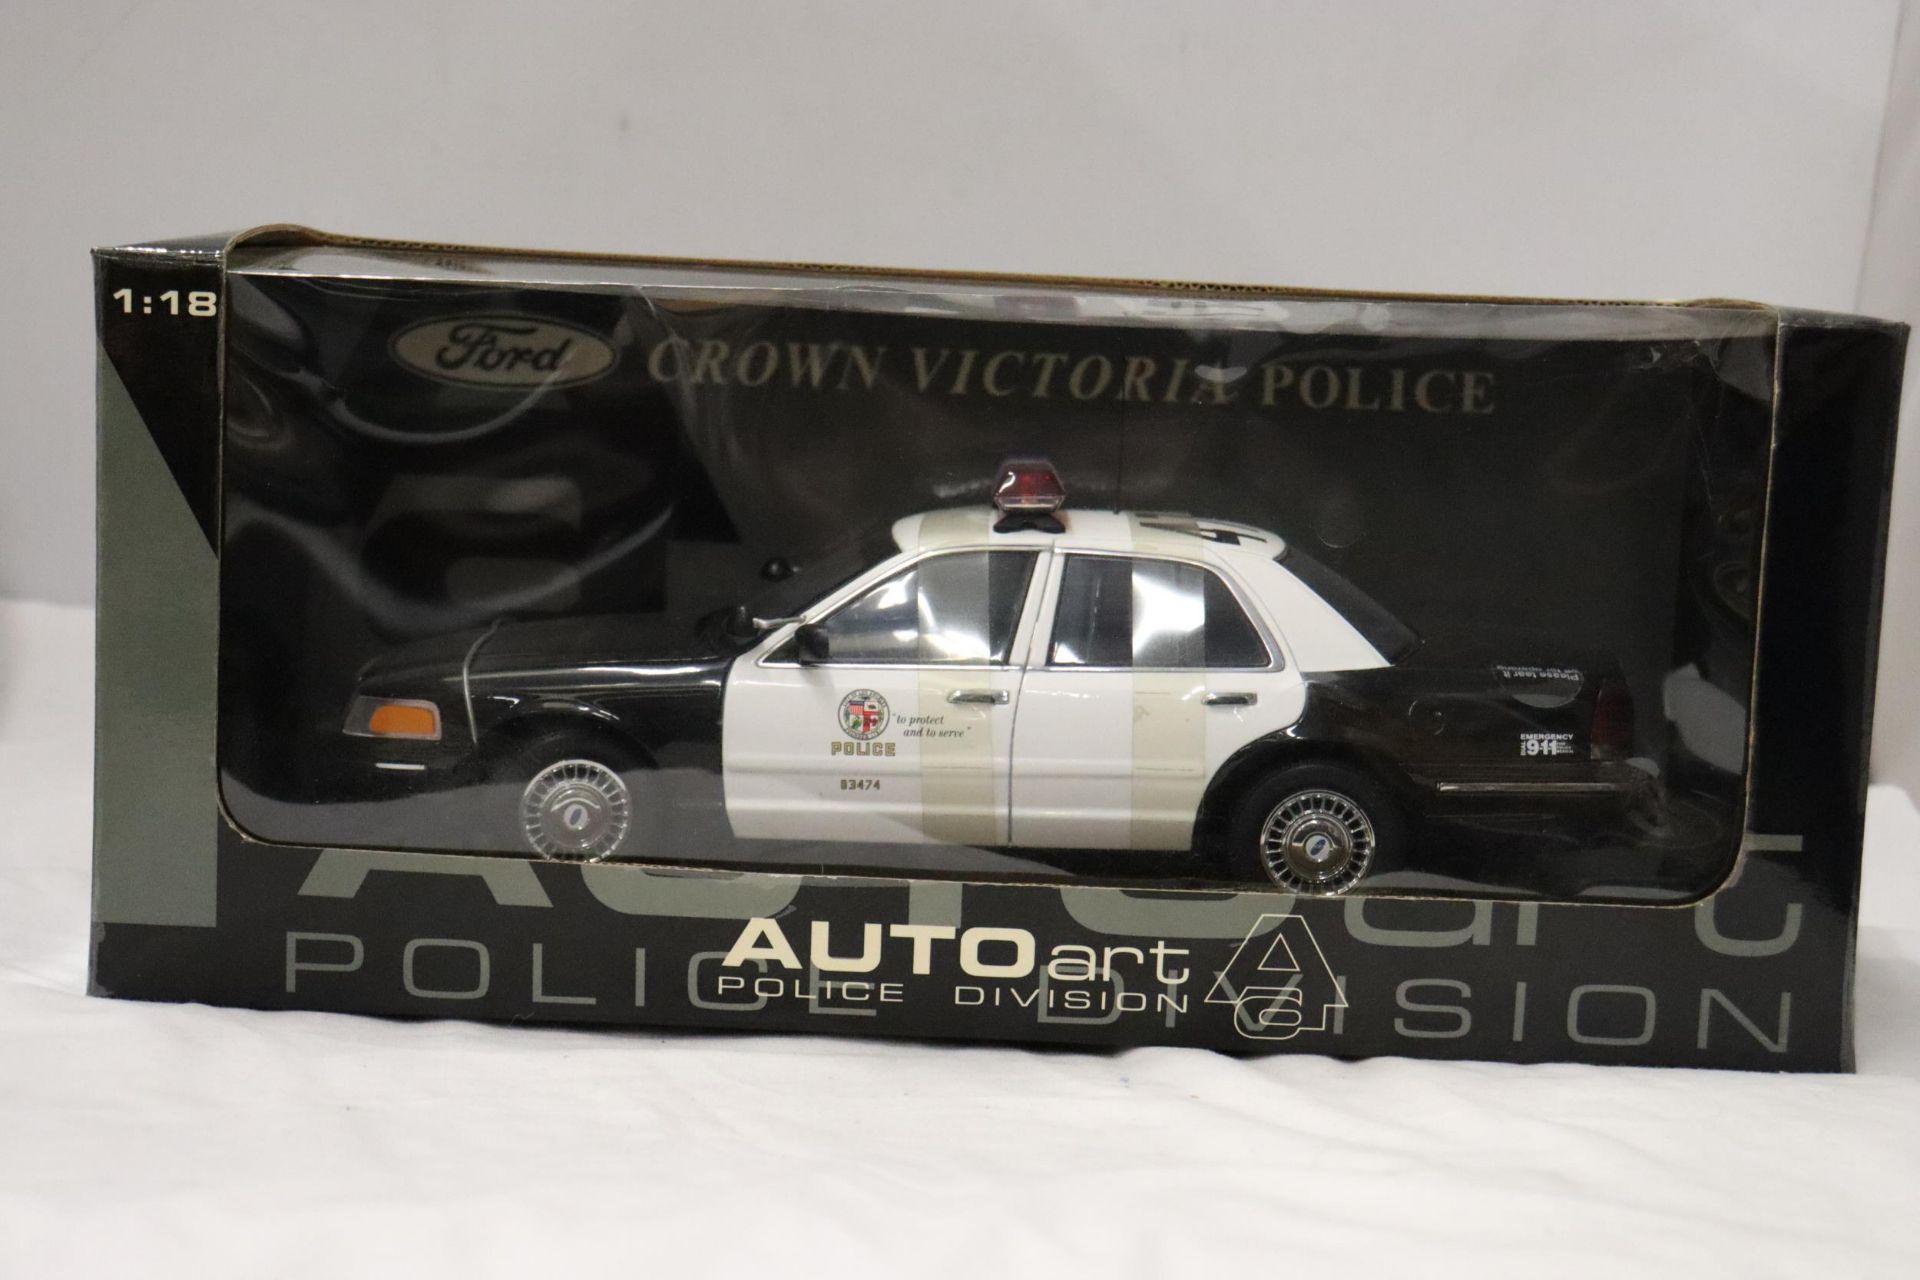 AN AUTO ART, POLICE DIVISION CAR, SCALE 1:18, AS NEW IN BOX - Image 2 of 7